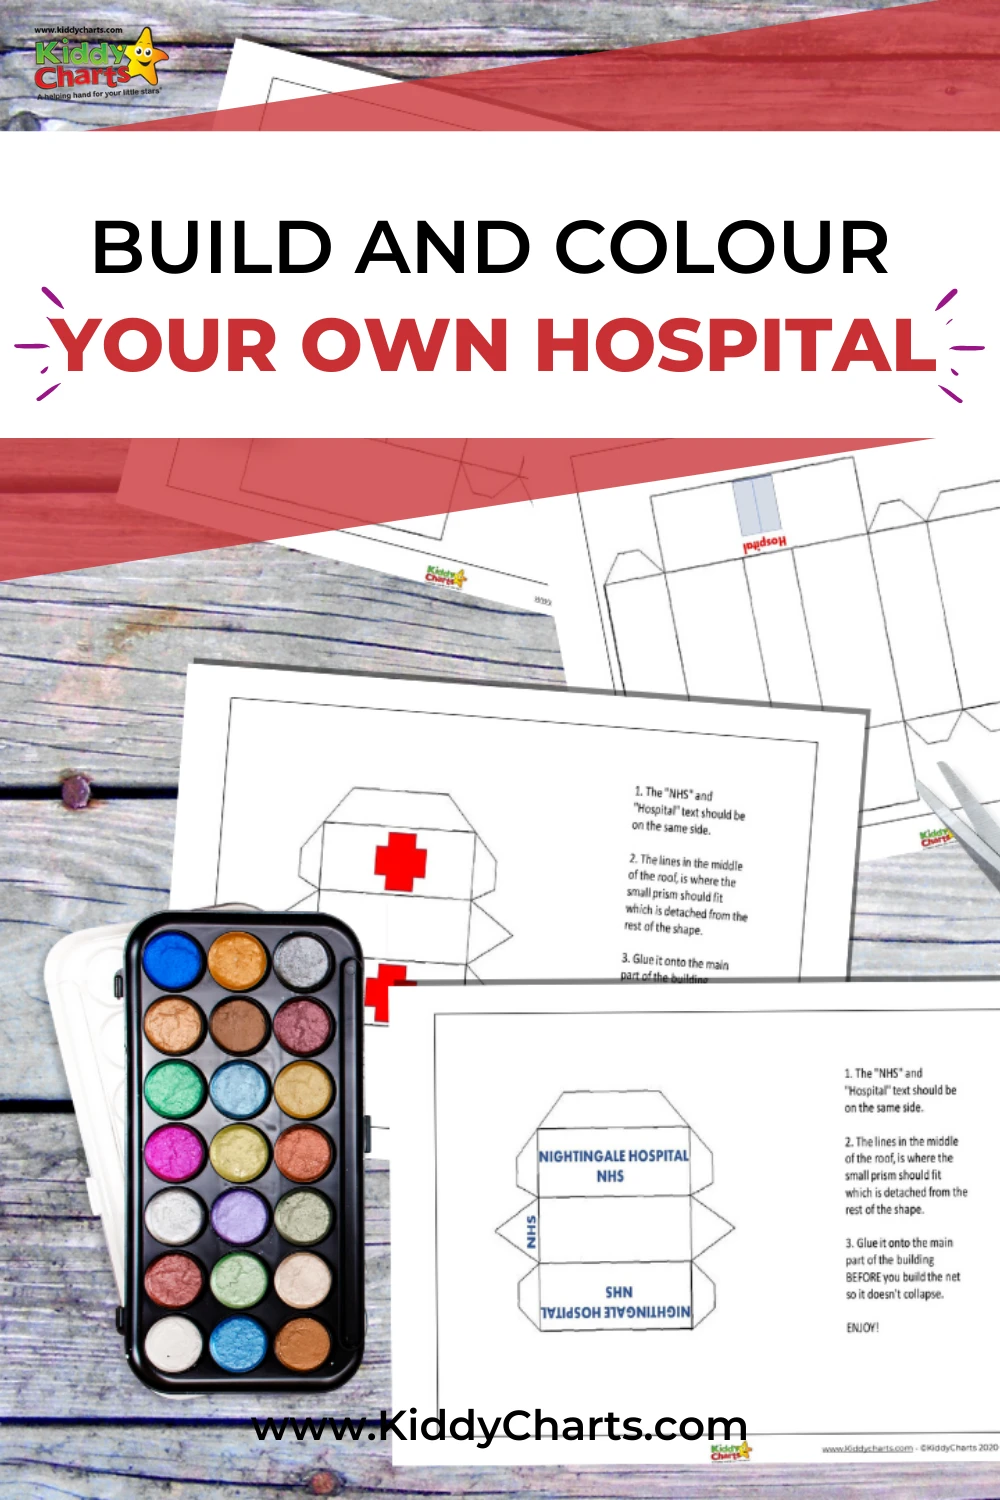 Build and colour your own NHS Nightingale Hosptial